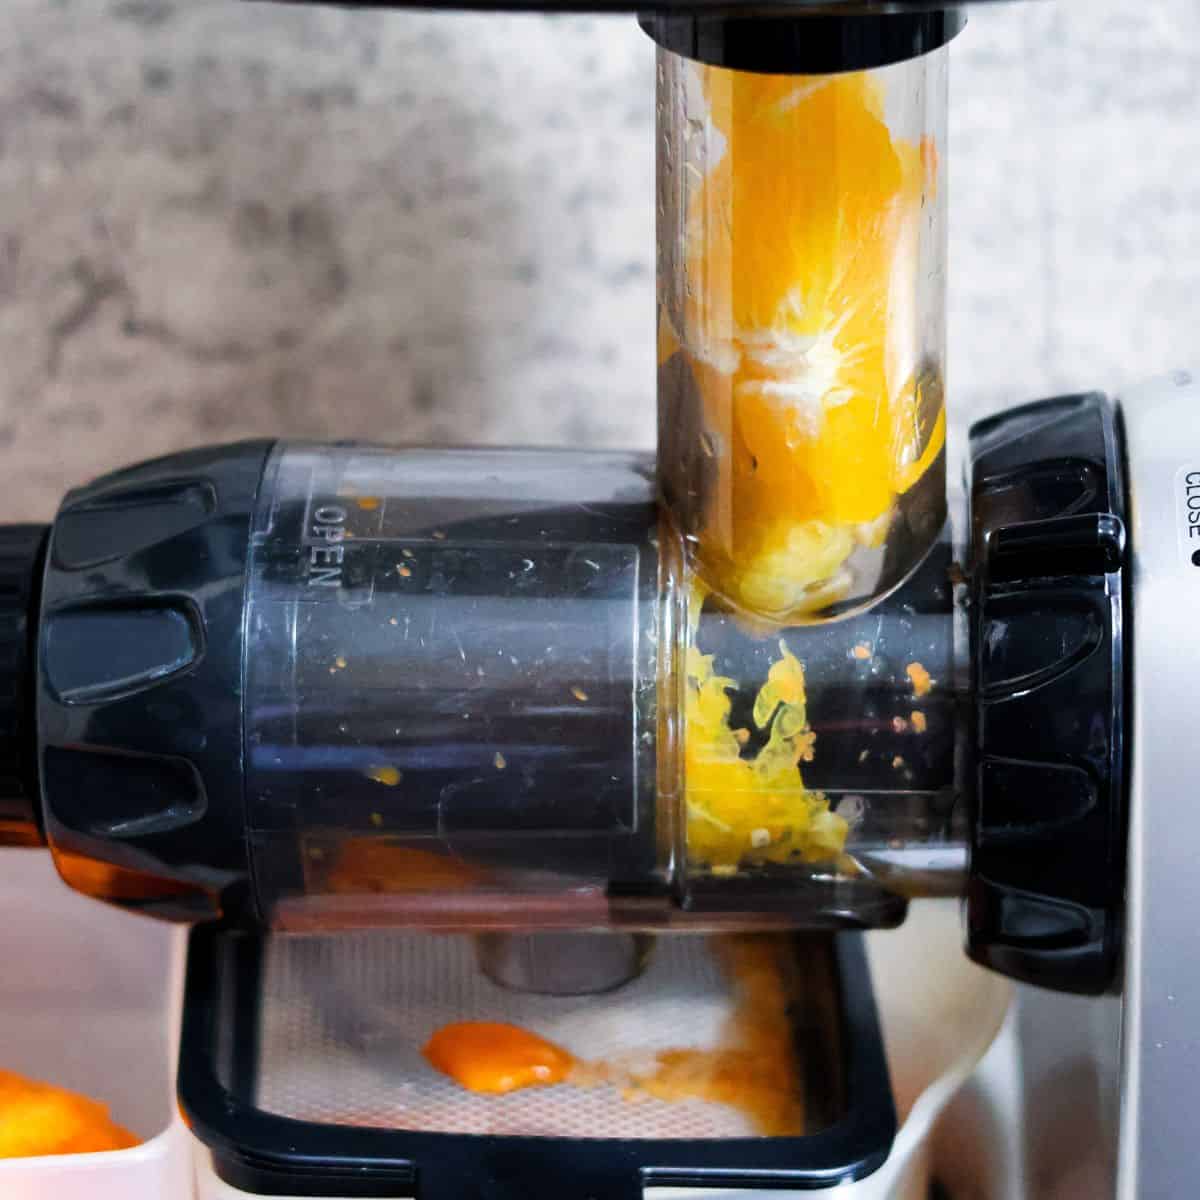 Close-up of a juicer in action, with orange pulp being crushed and juiced, vibrant orange liquid flowing down into the juicer's collection container, against a neutral background.